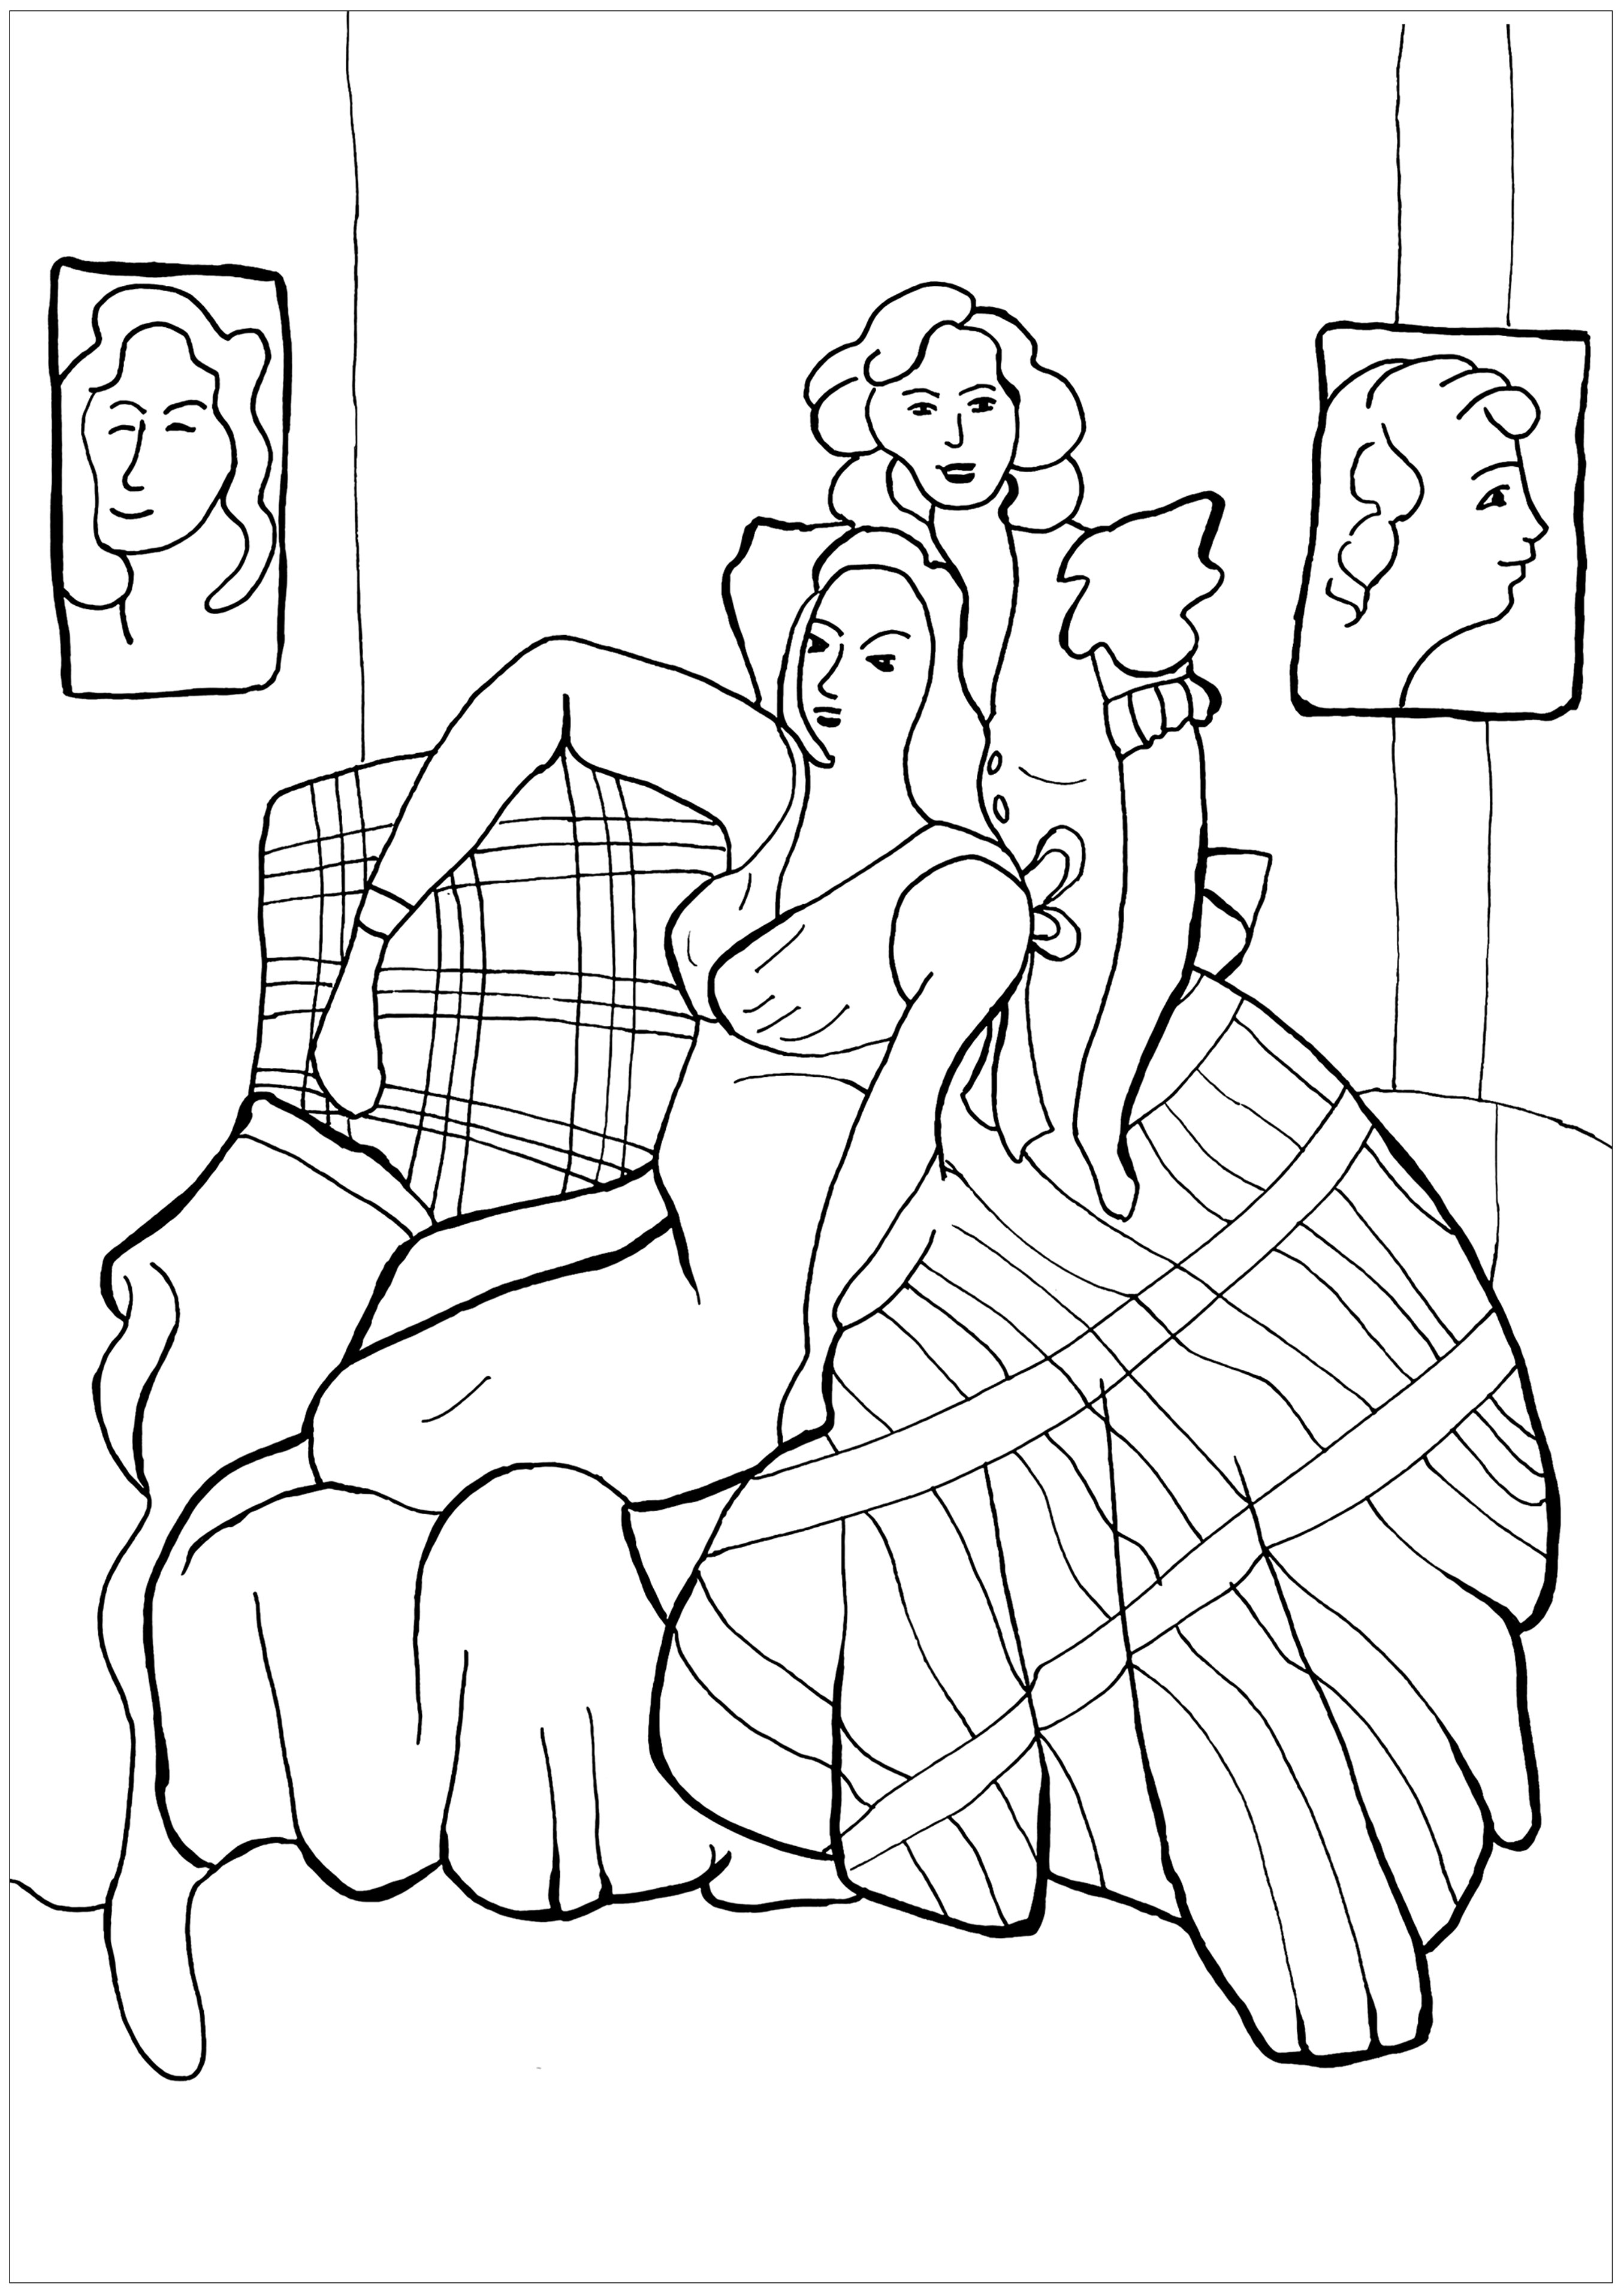 Coloring created from the painting by Henri Matisse: 'Two young girls, yellow dress, plaid dress' (1941)